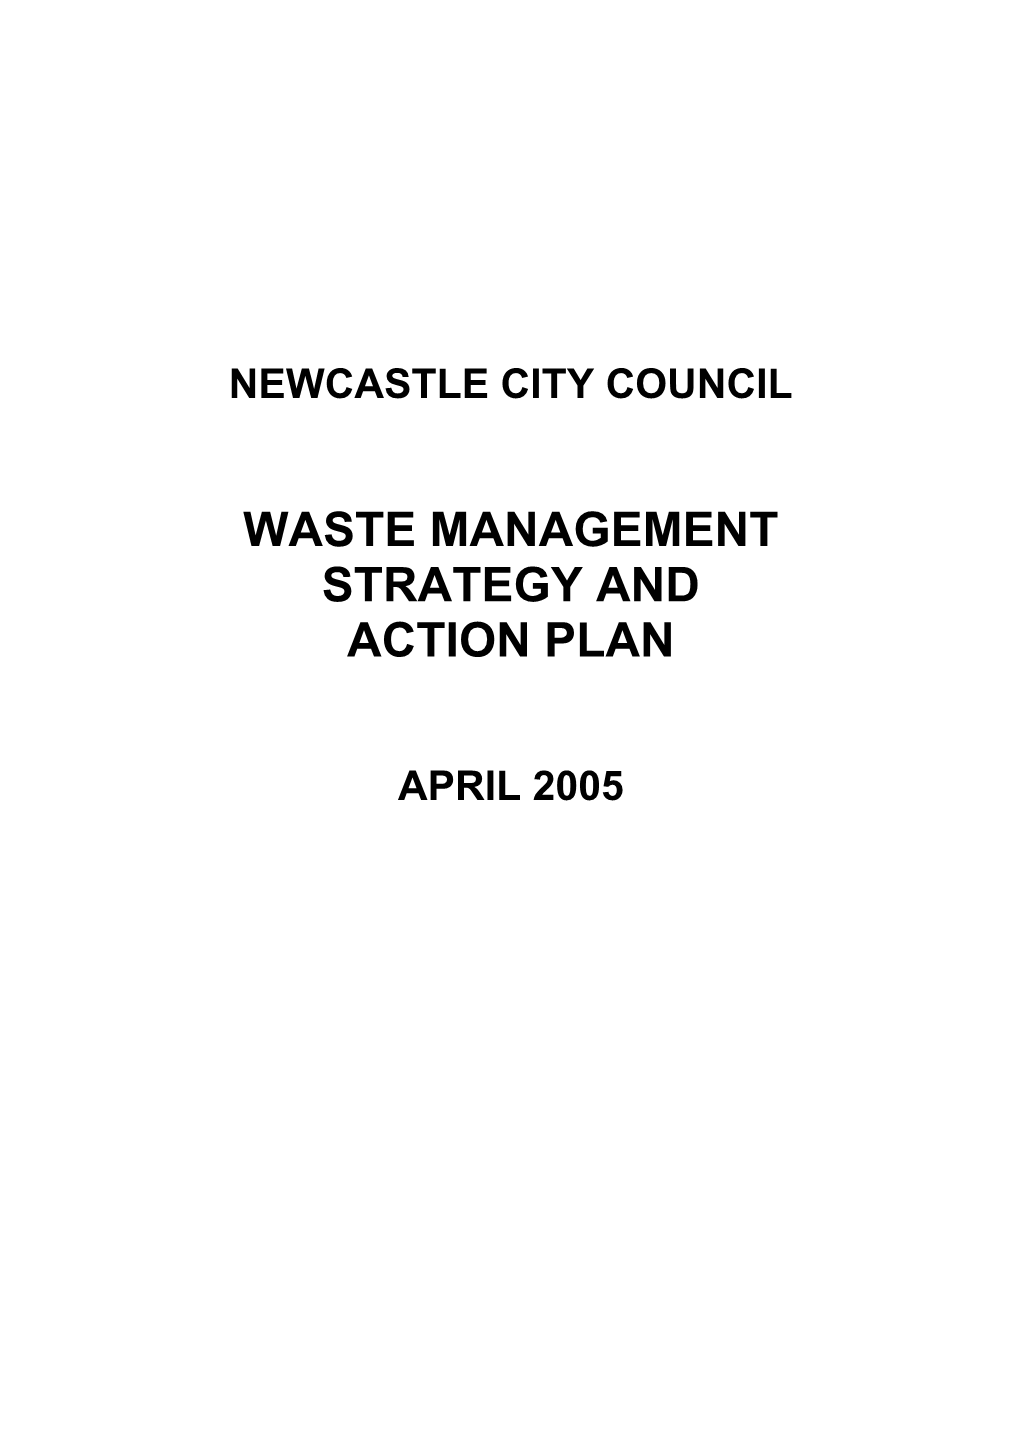 Waste Management Strategy And